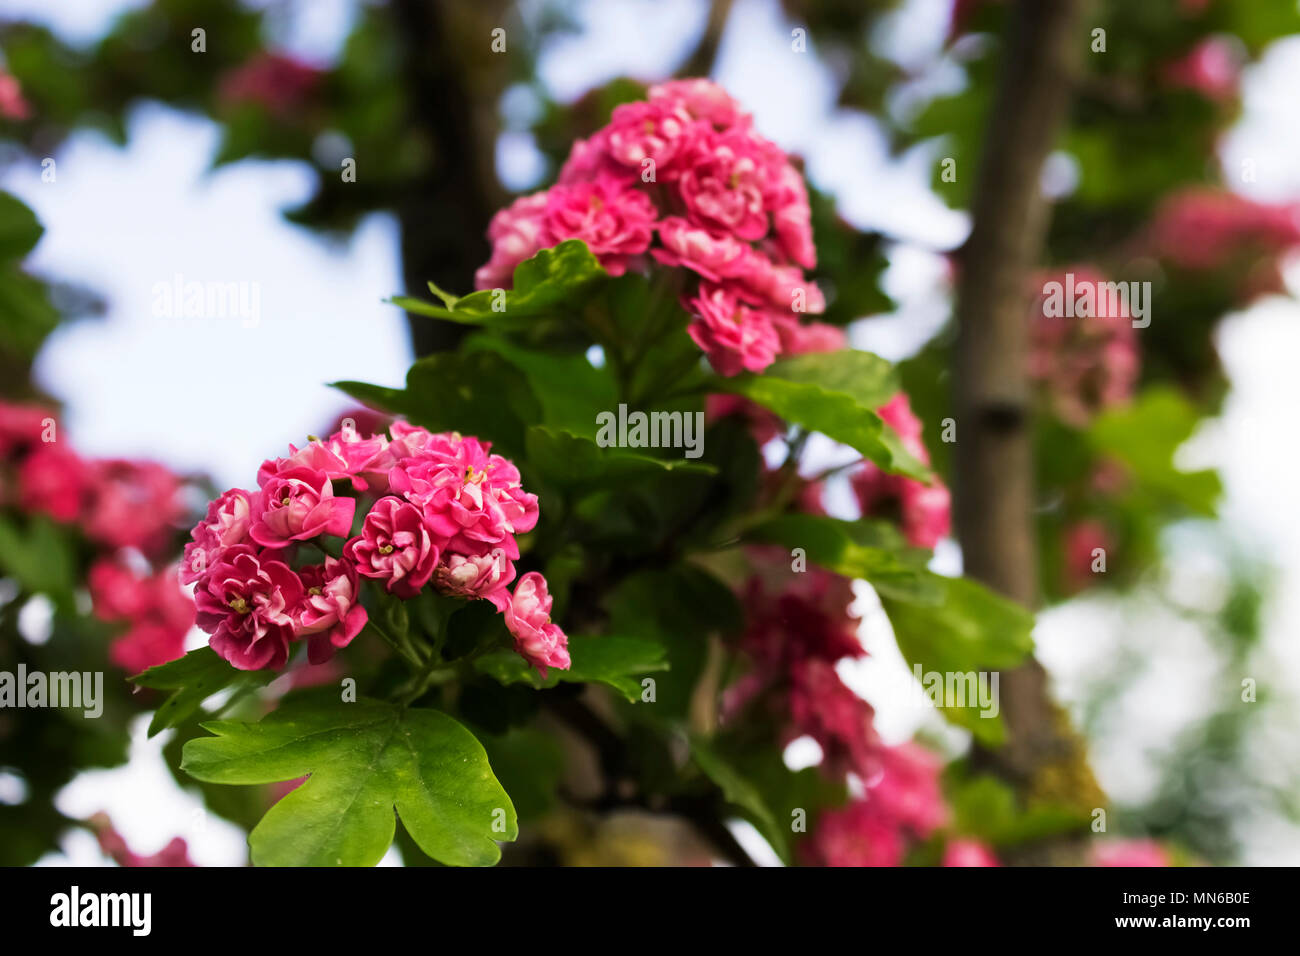 A bunch of pink Hawthorn flowers on the branch and green leafs Stock Photo